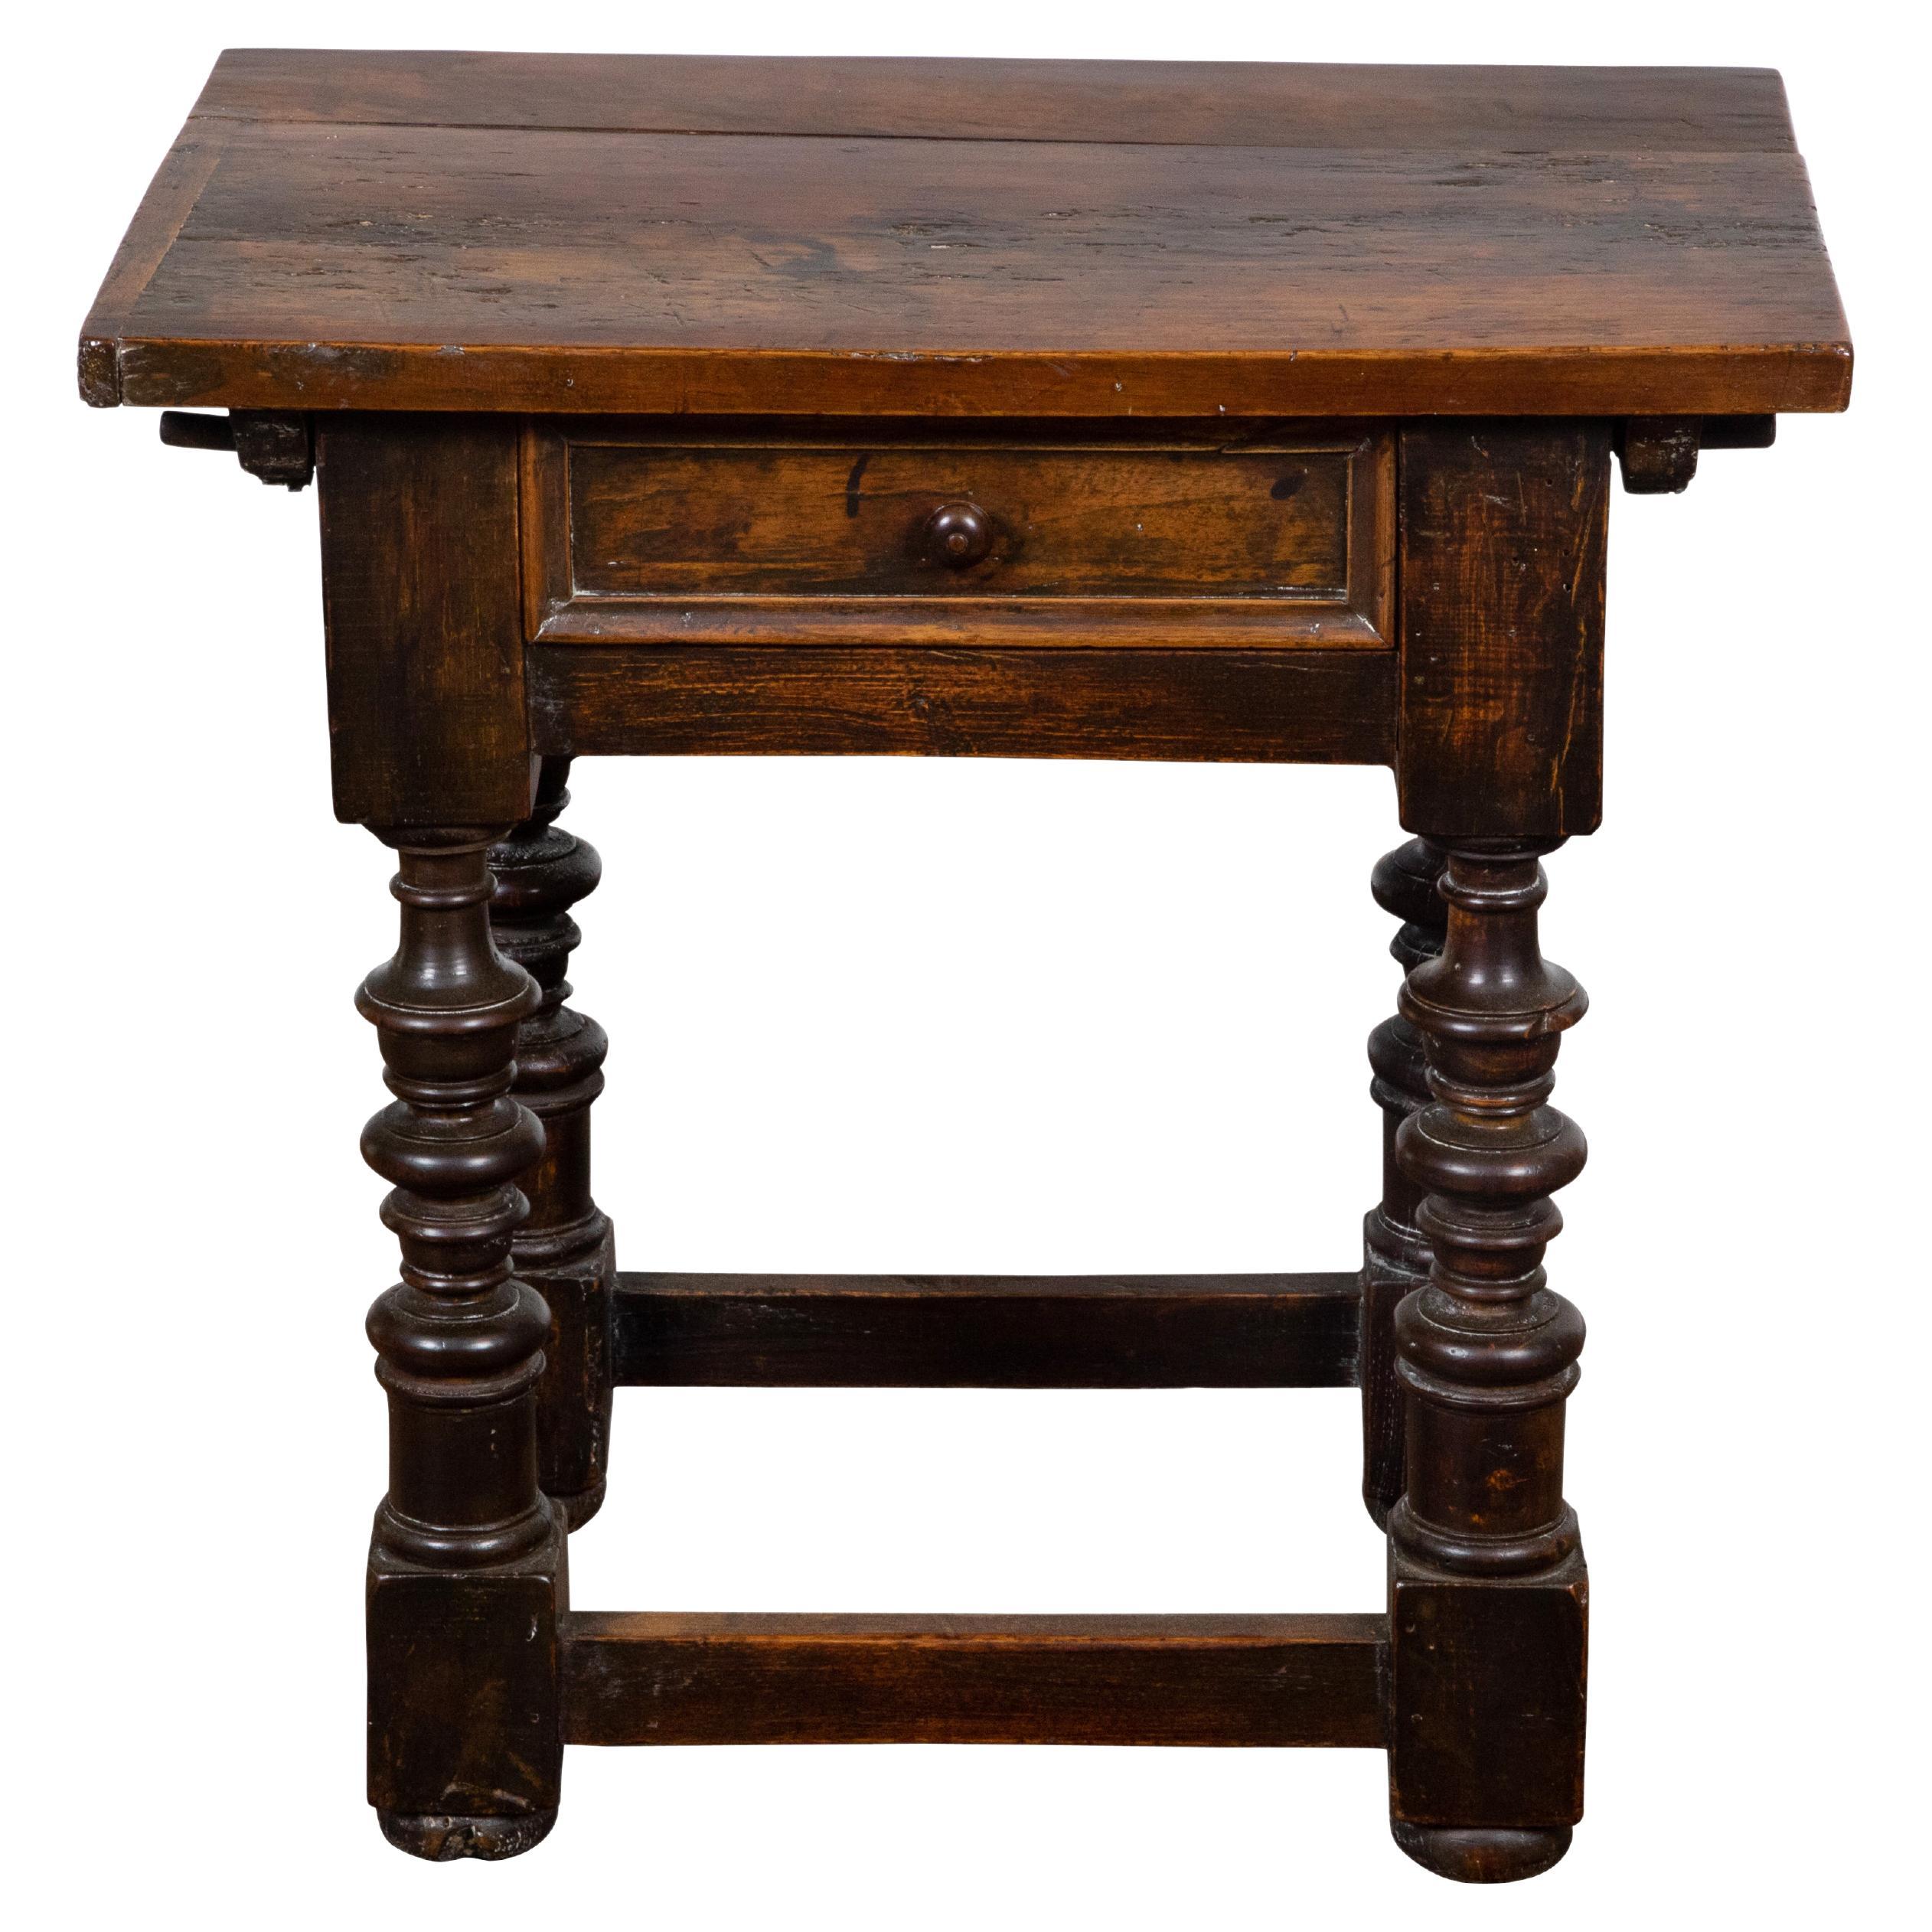 Italian 18th Century Walnut Side Table with Turned Legs and Single Drawer For Sale